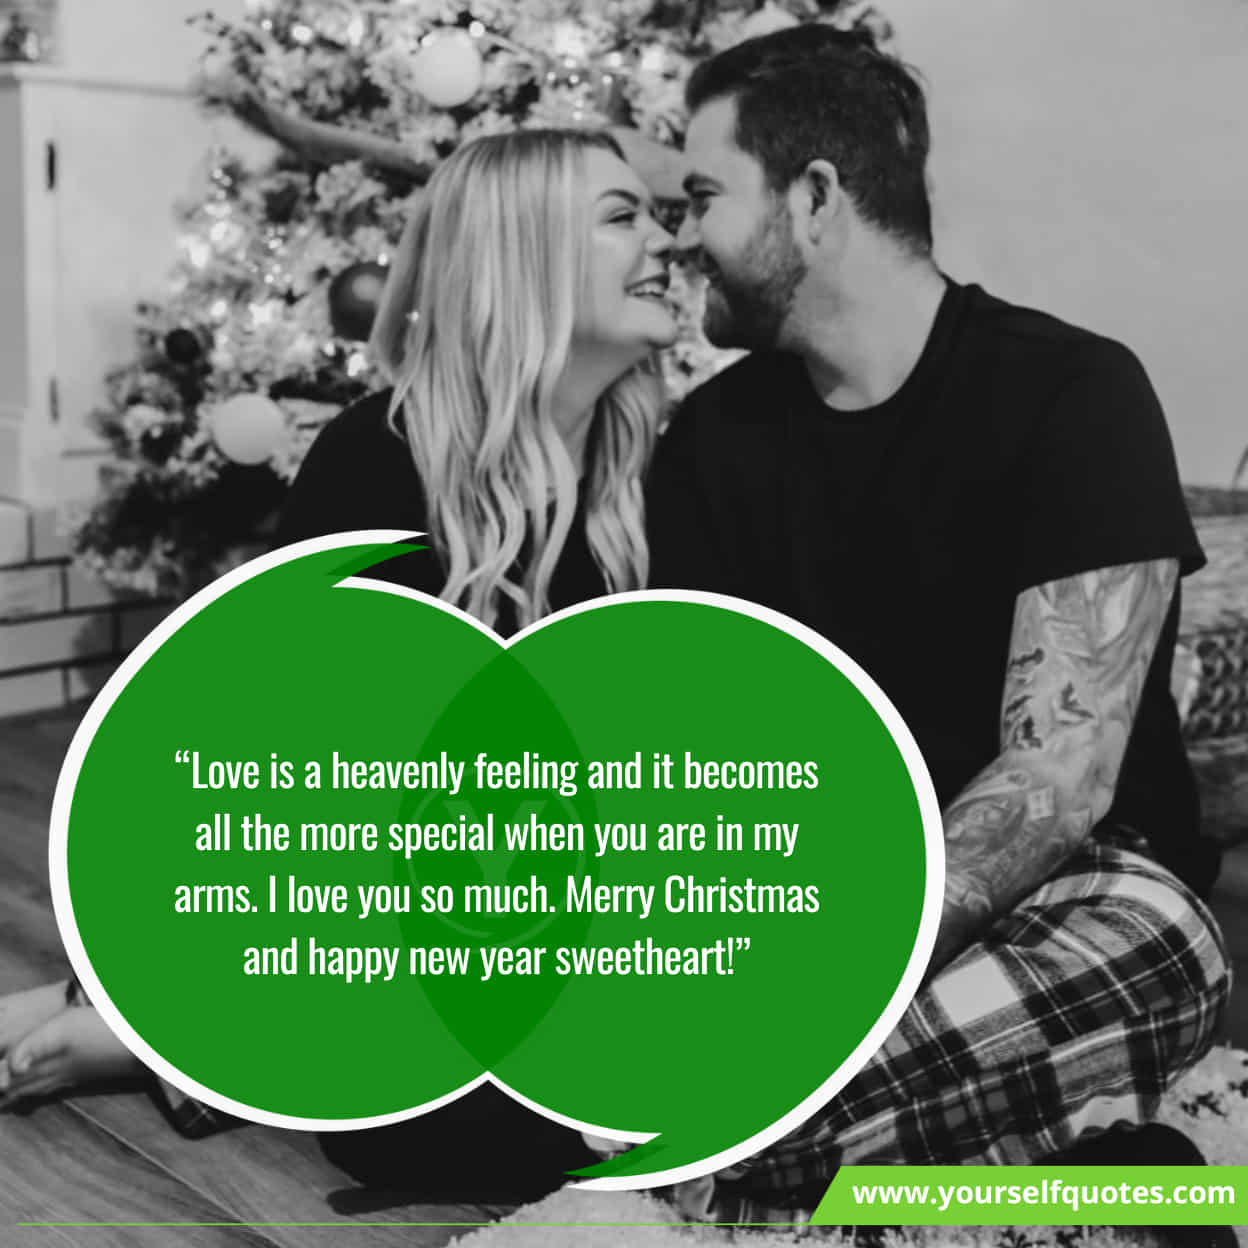 Christmas Love Wishes Messages for Girlfriend